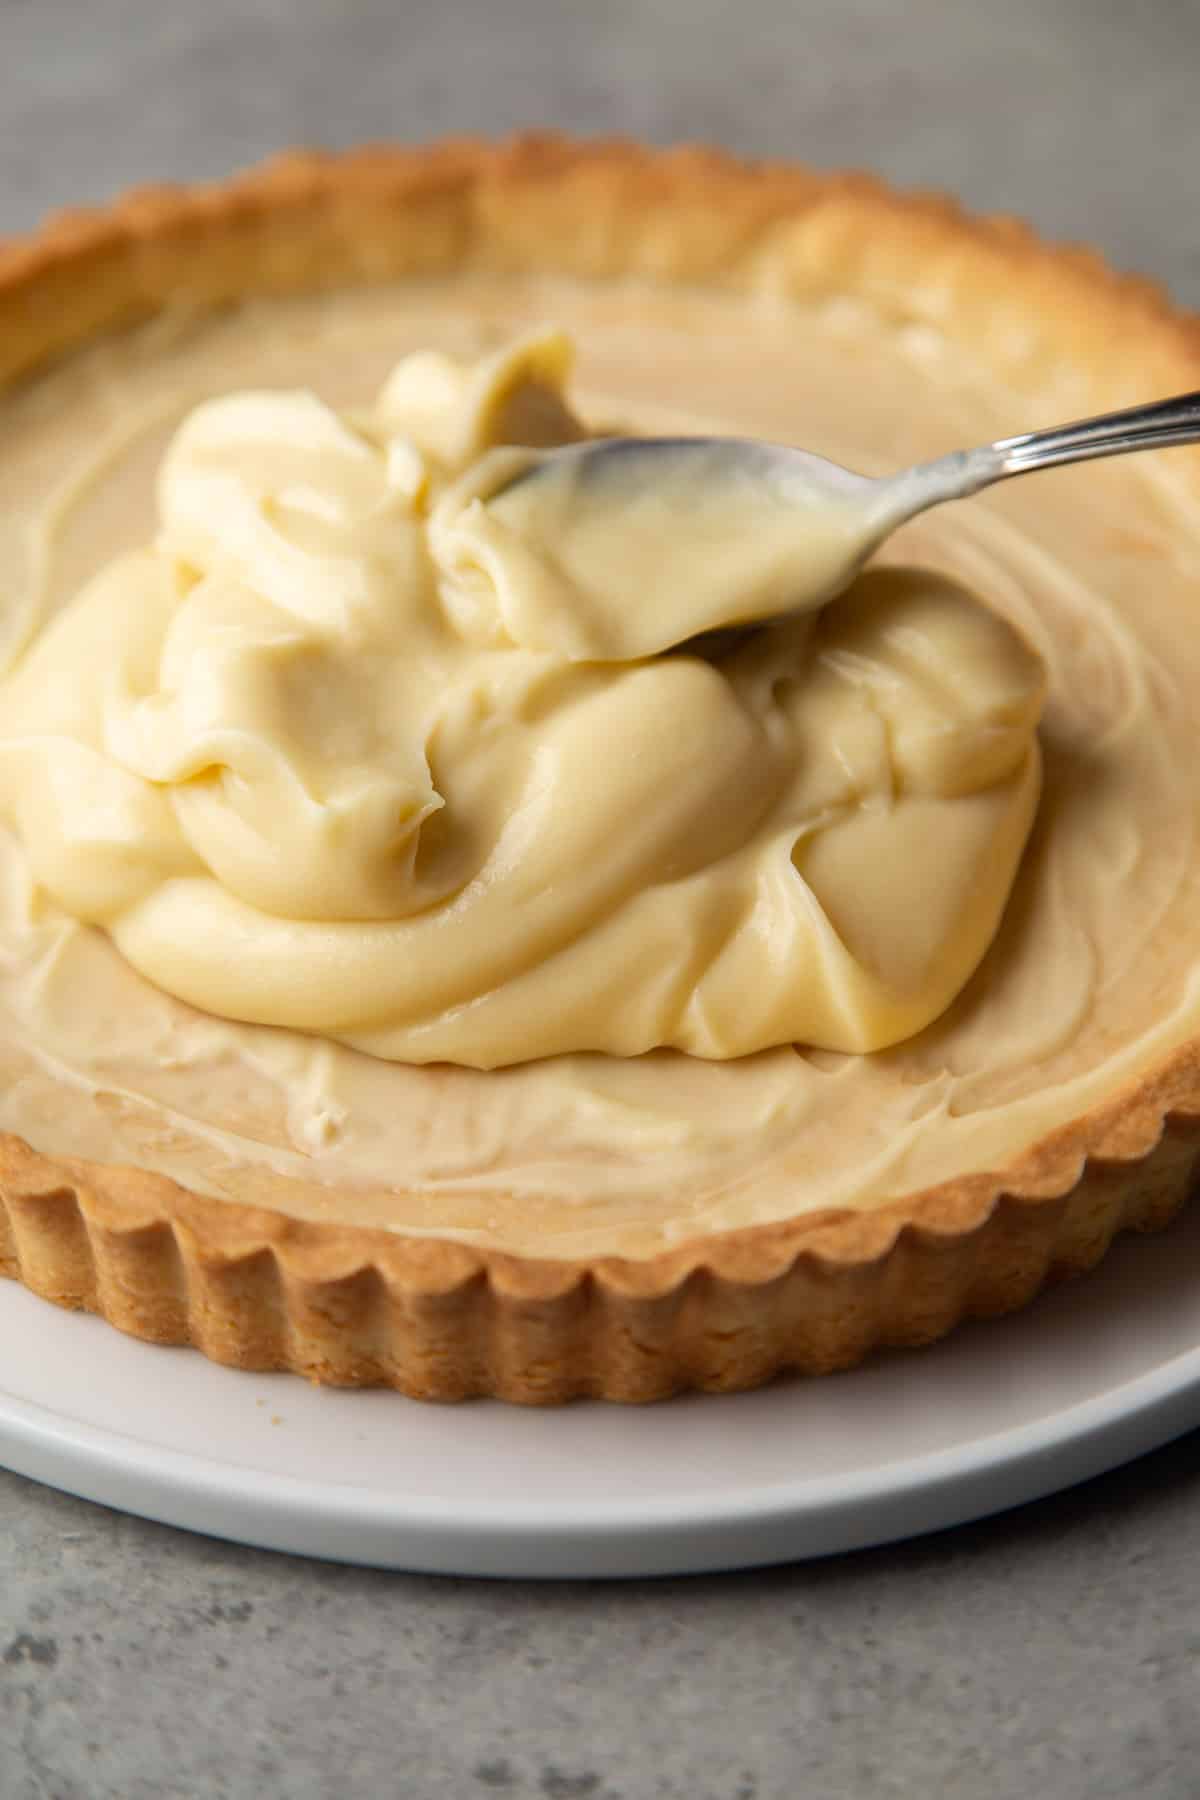 pastry cream spread into fully cooked tart shell.